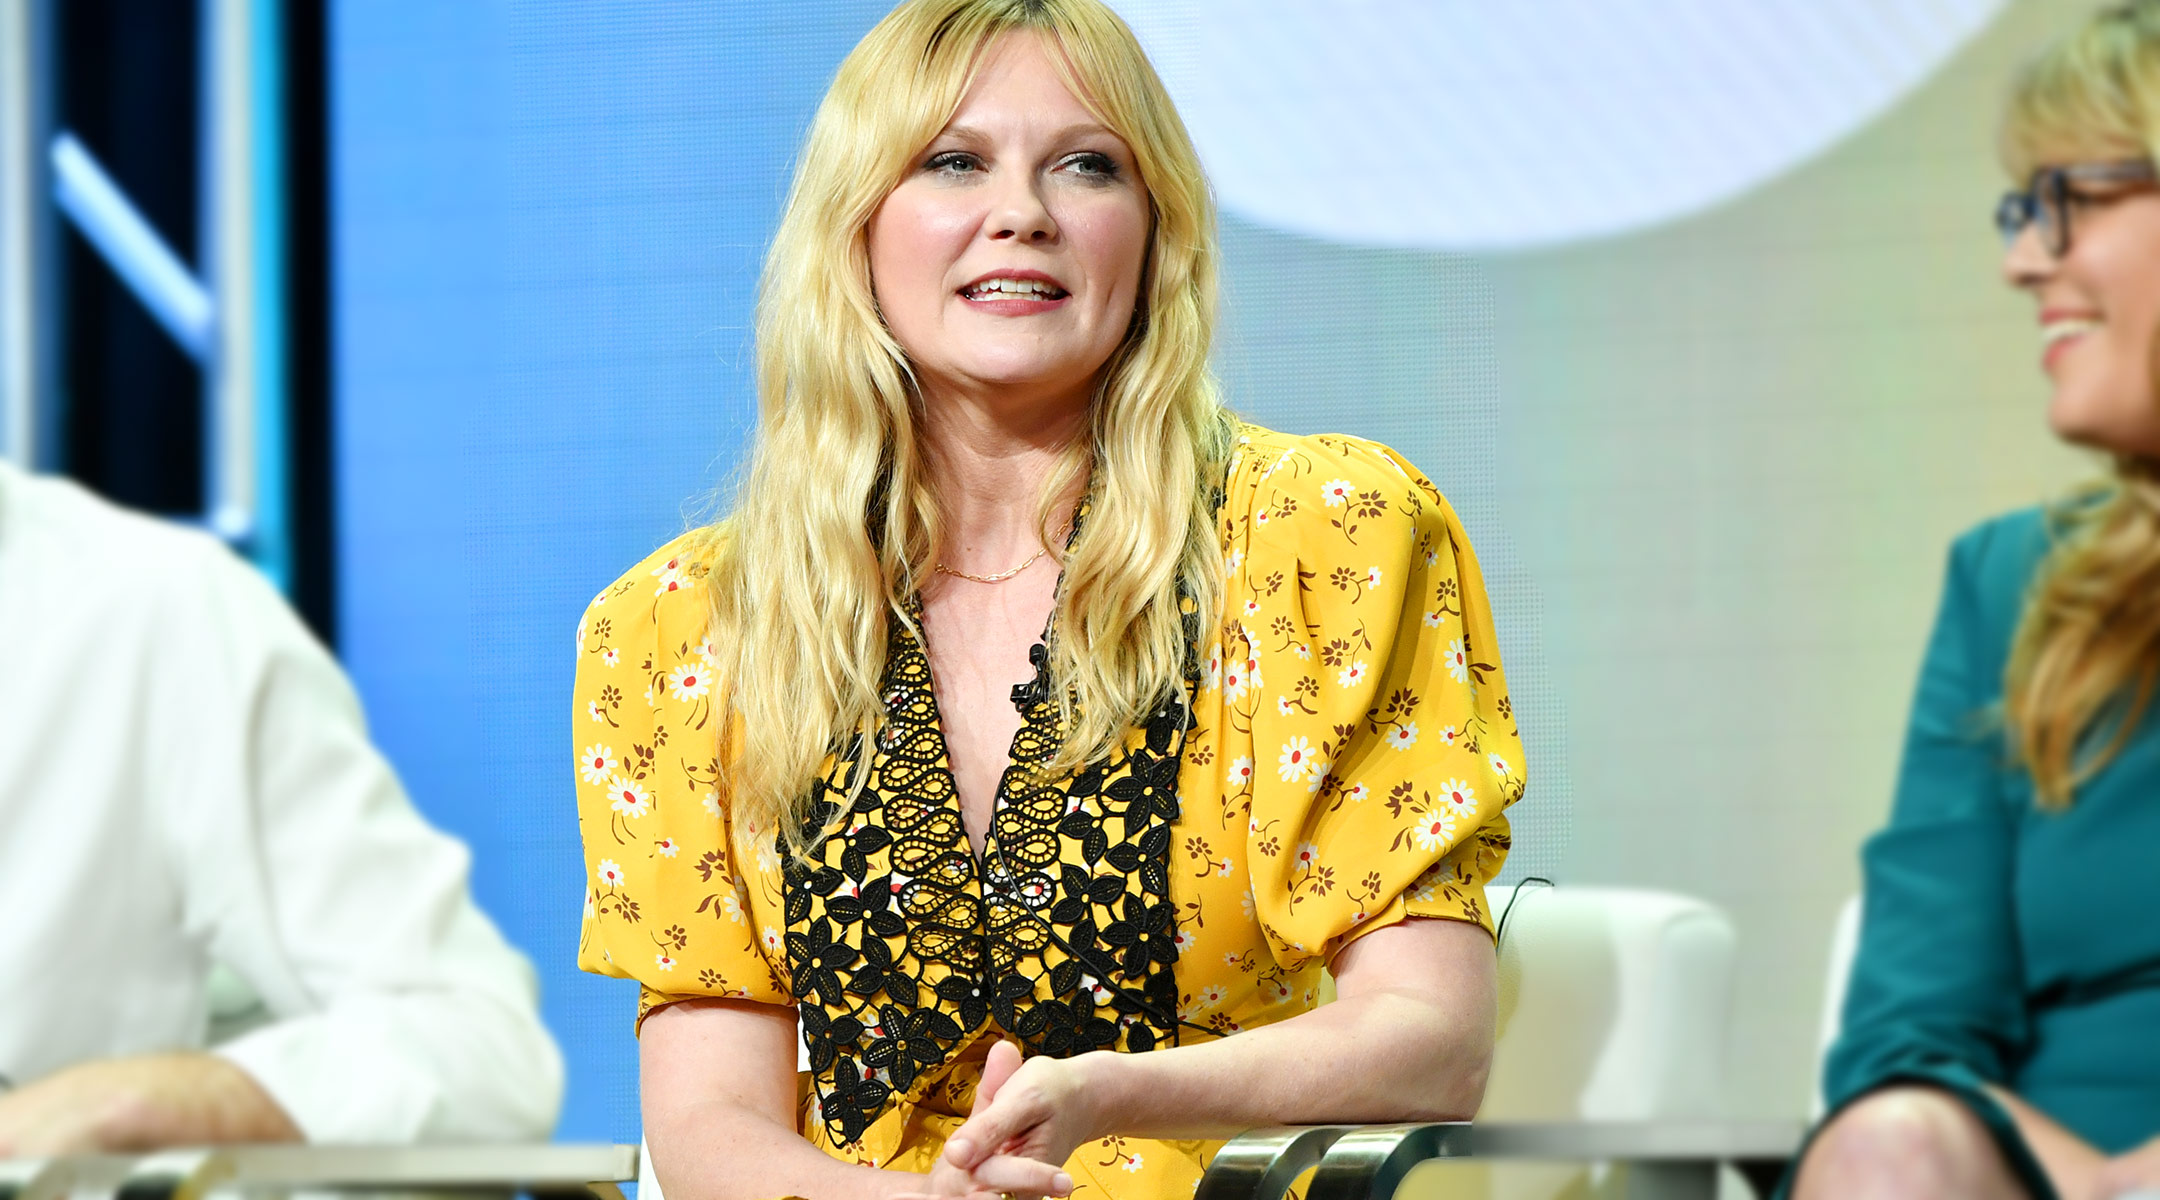 kristen dunst says it's easier to return to work than stay home with her baby